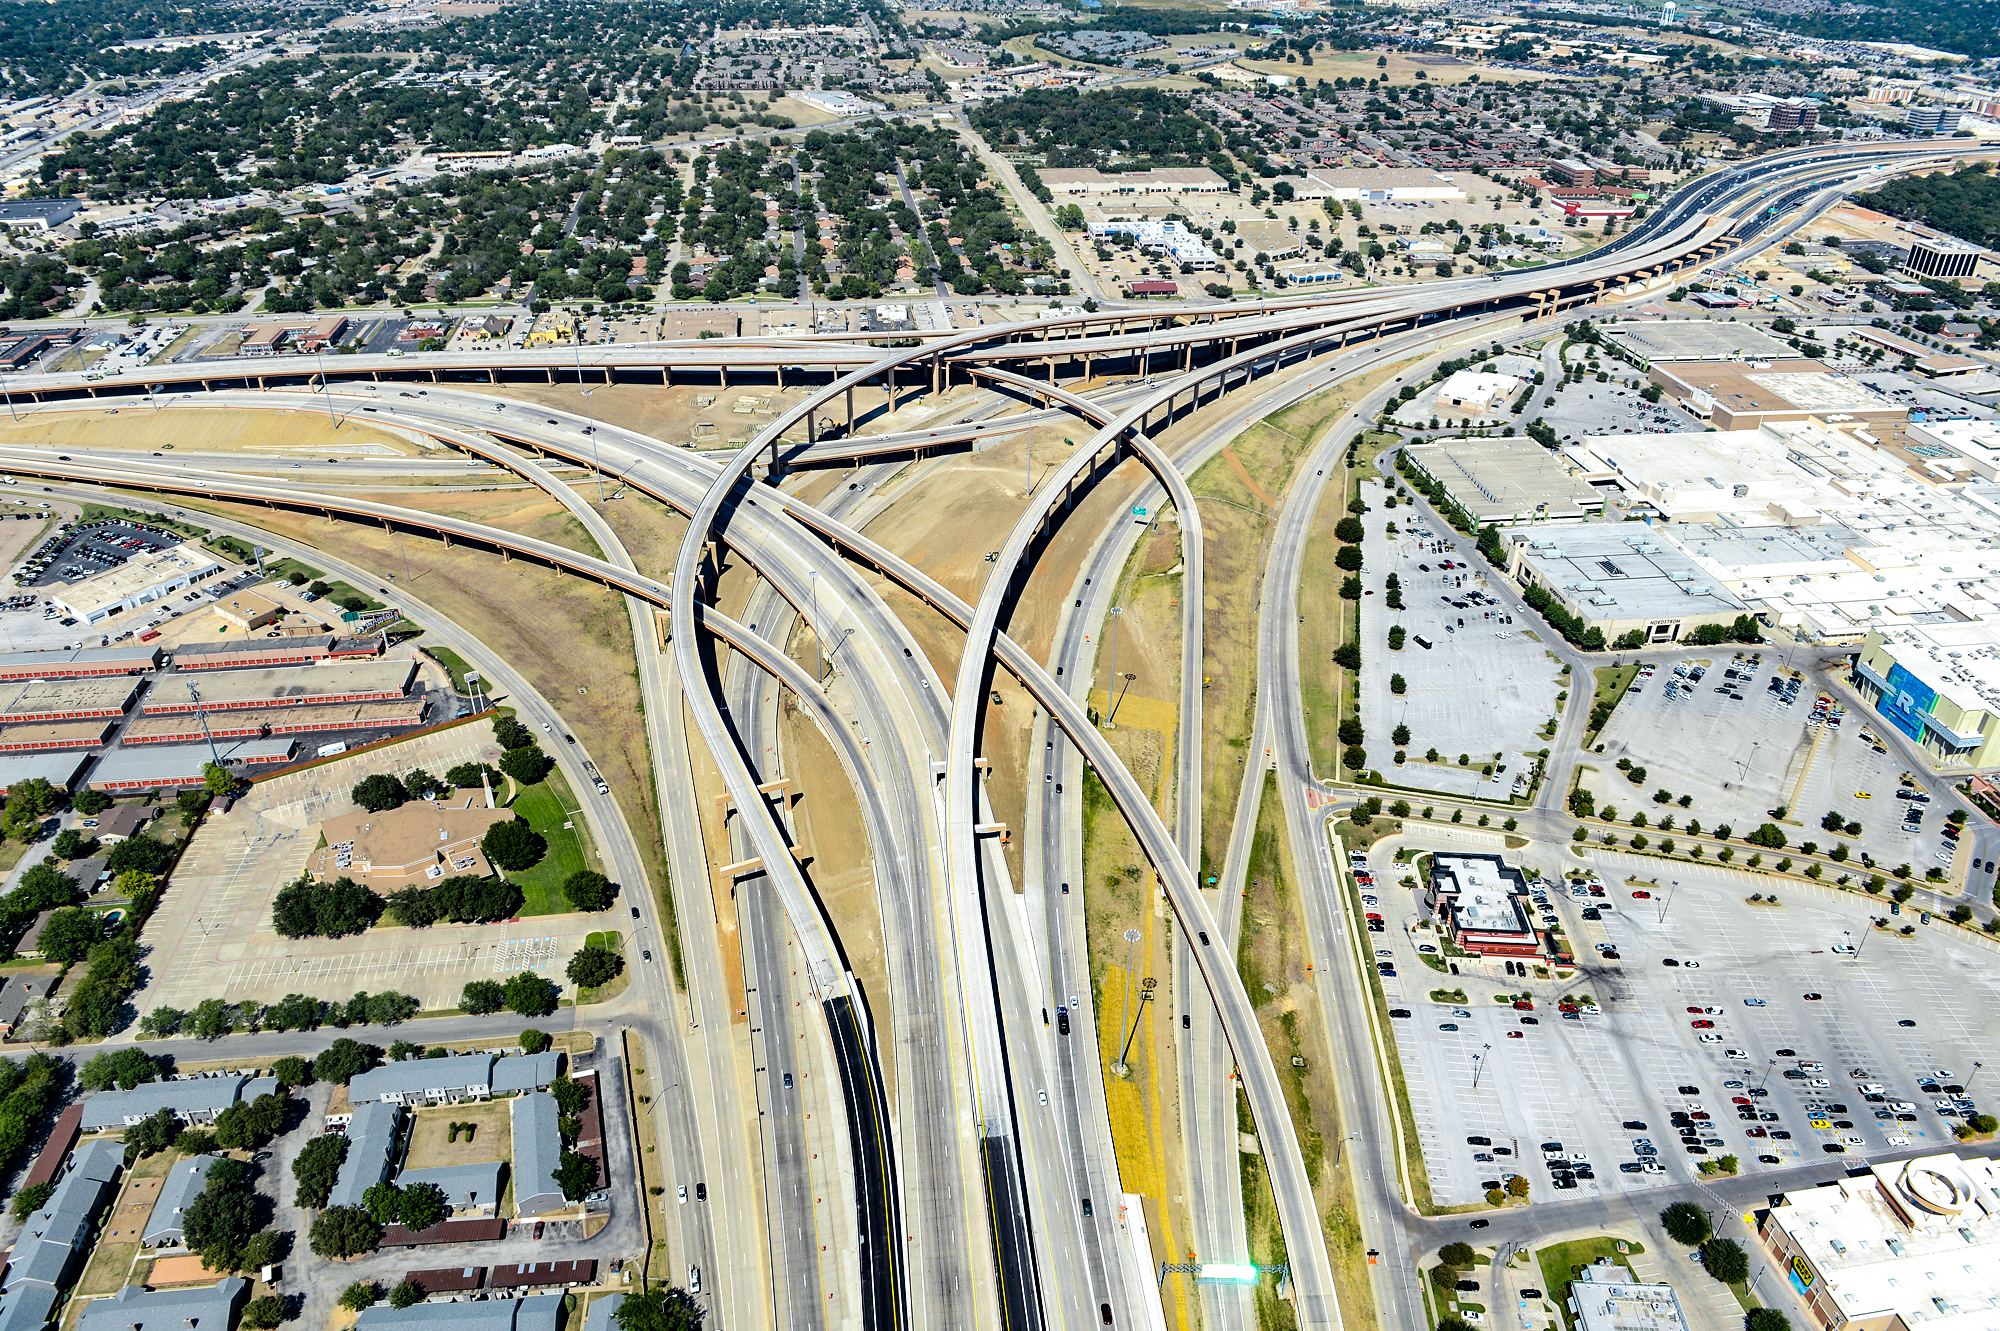 Aerial view of Highway 183 interchanges